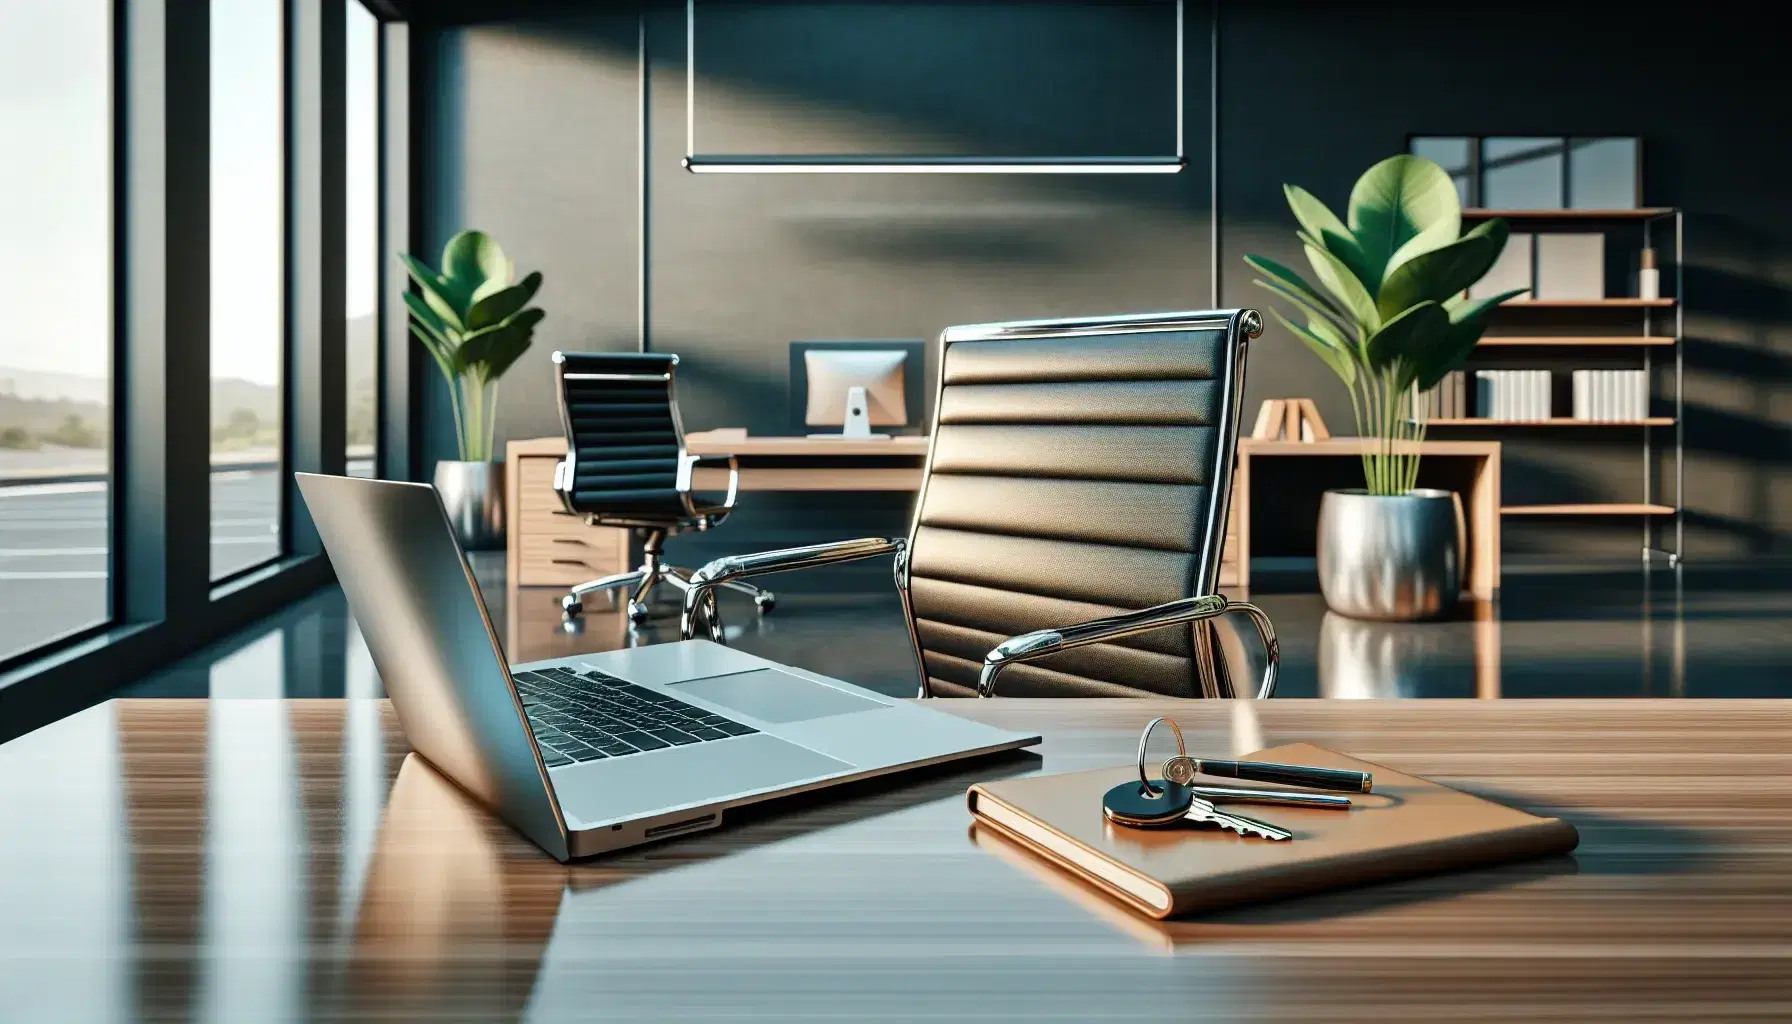 Modern office setup with a silver laptop on a wooden desk, keys, a black leather chair, and a potted plant by a large window with natural light.